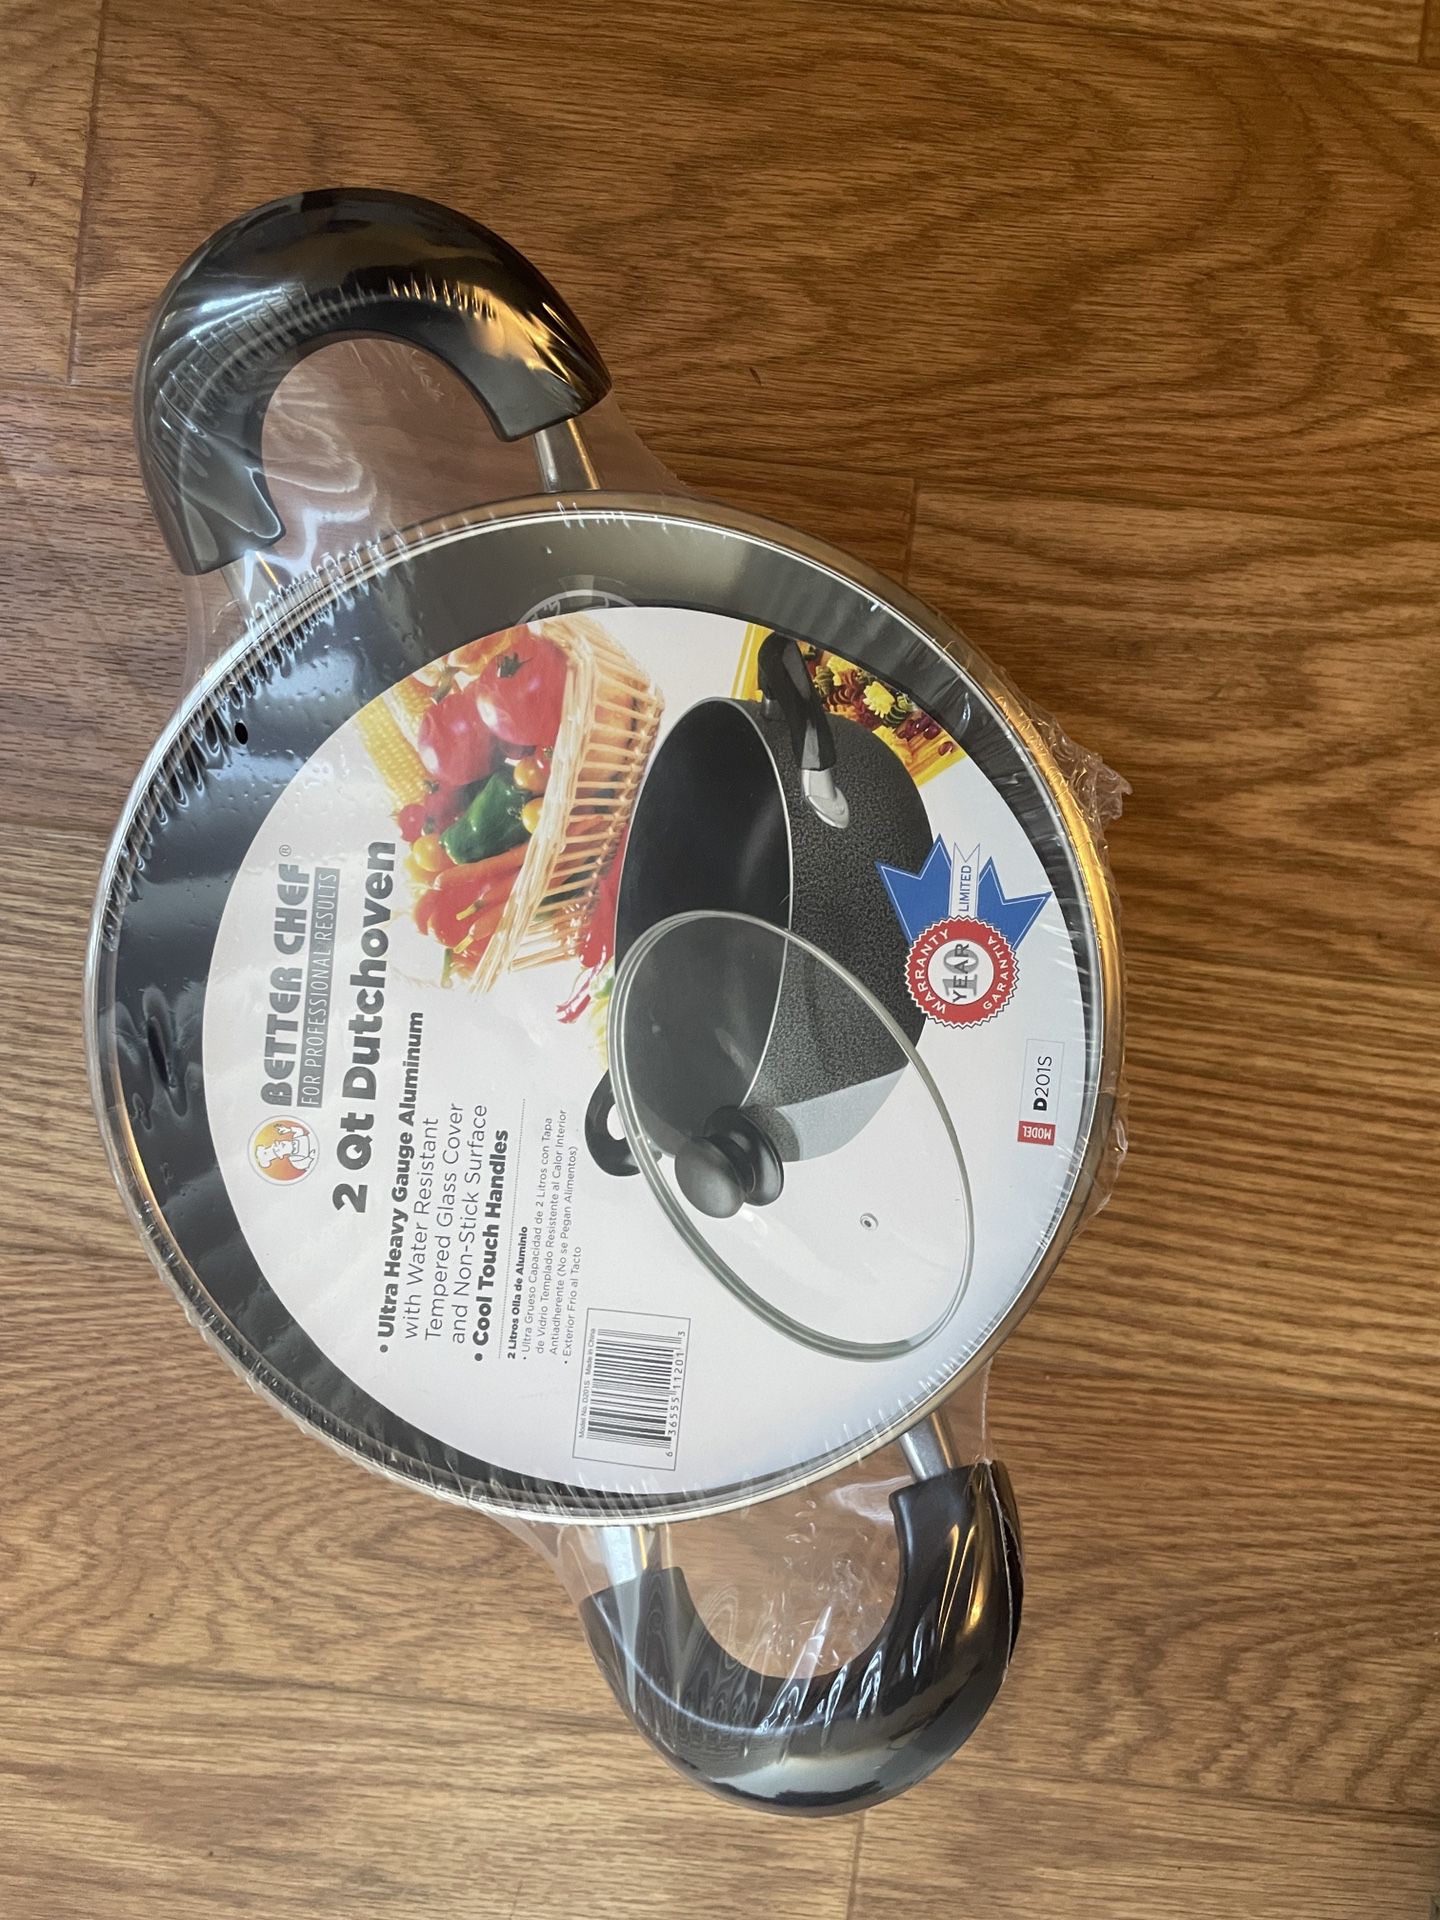 Assorted brand new in box cookware